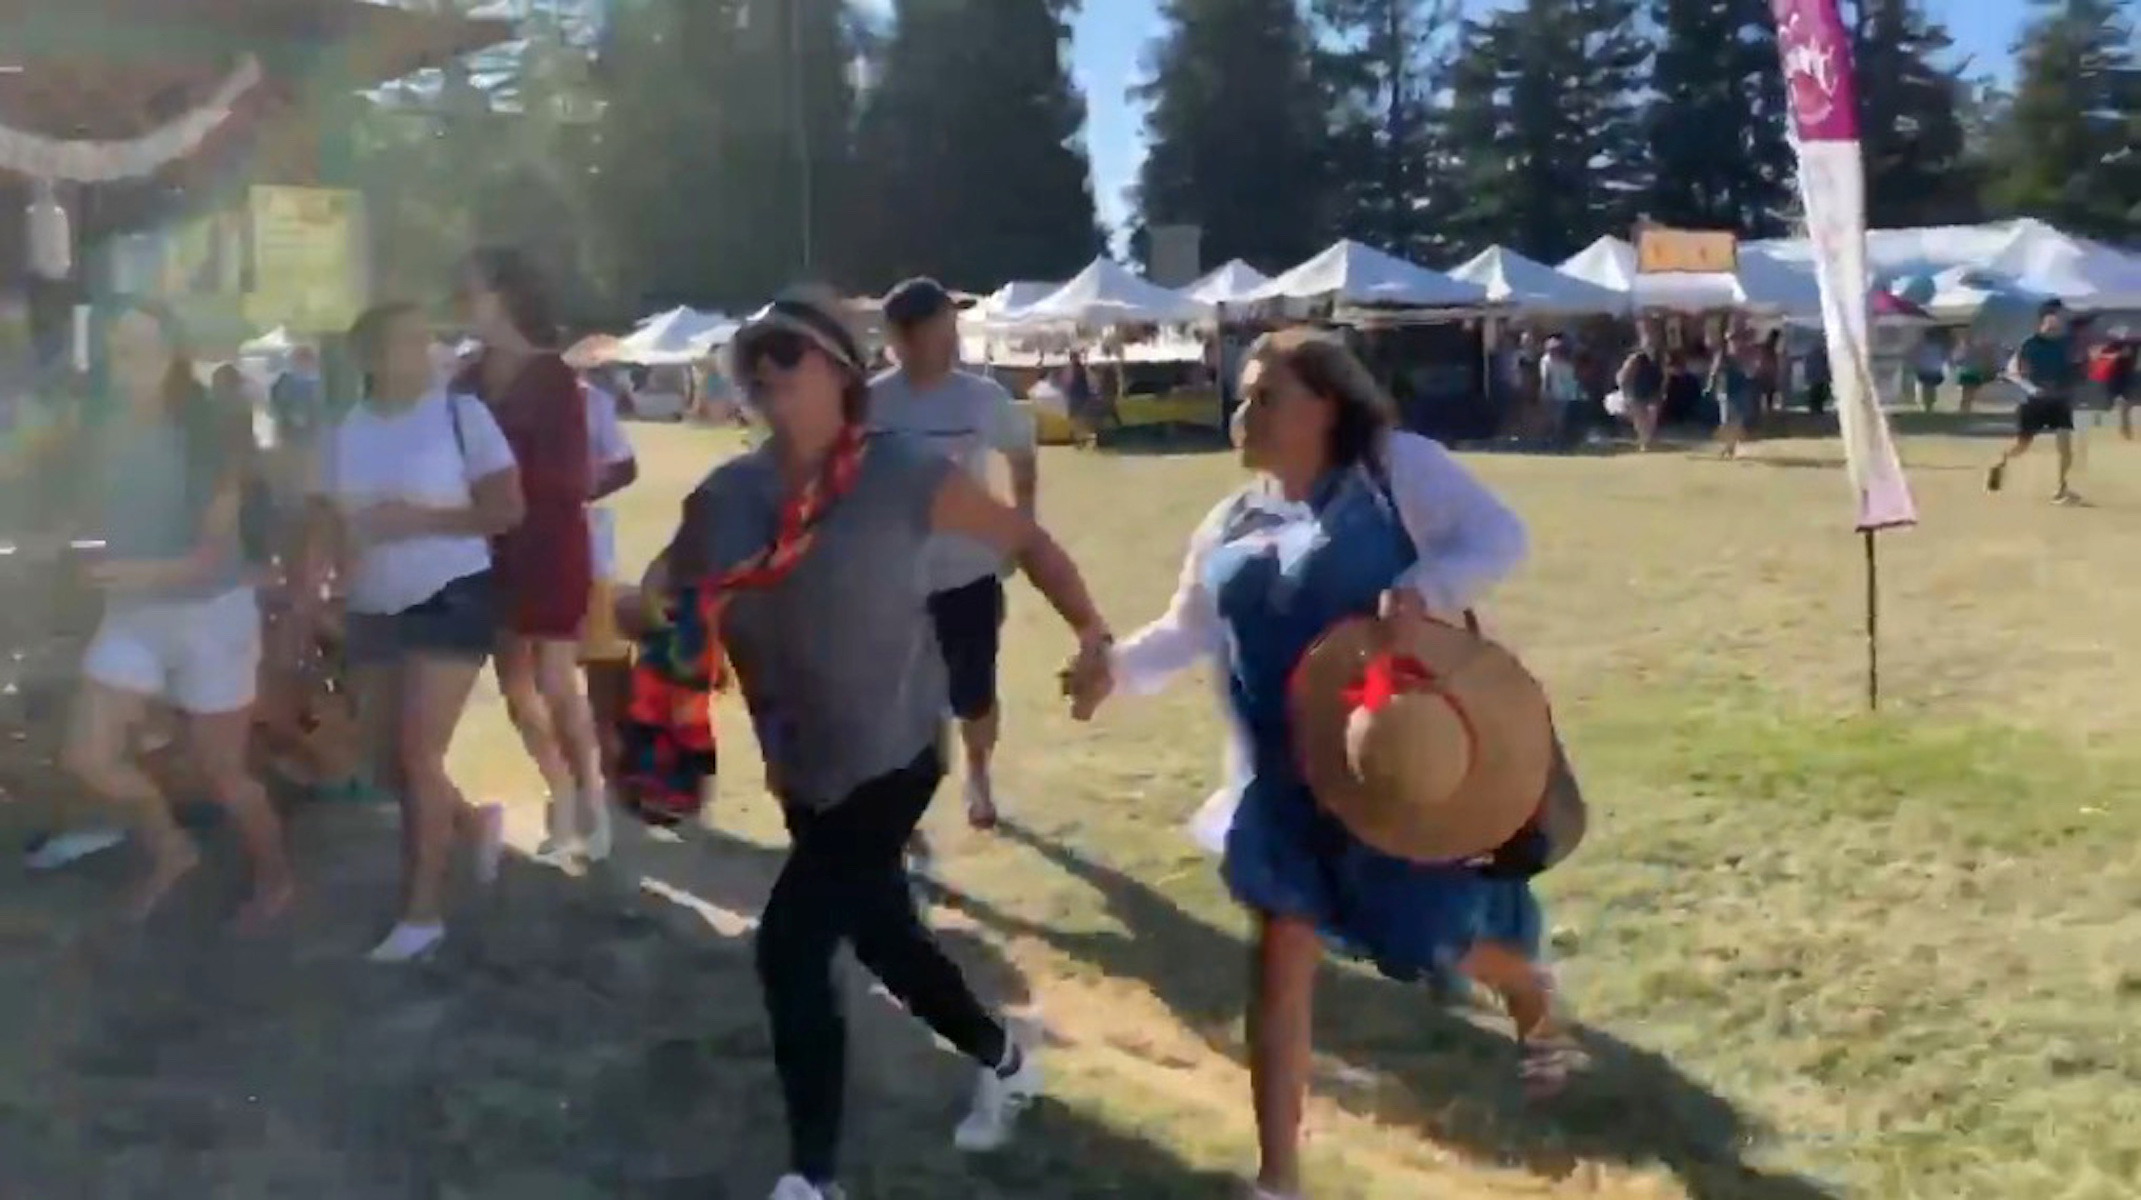 Social media video grab of people running away as an active shooter was reported at the Gilroy Garlic Festival, south of San Jose, California